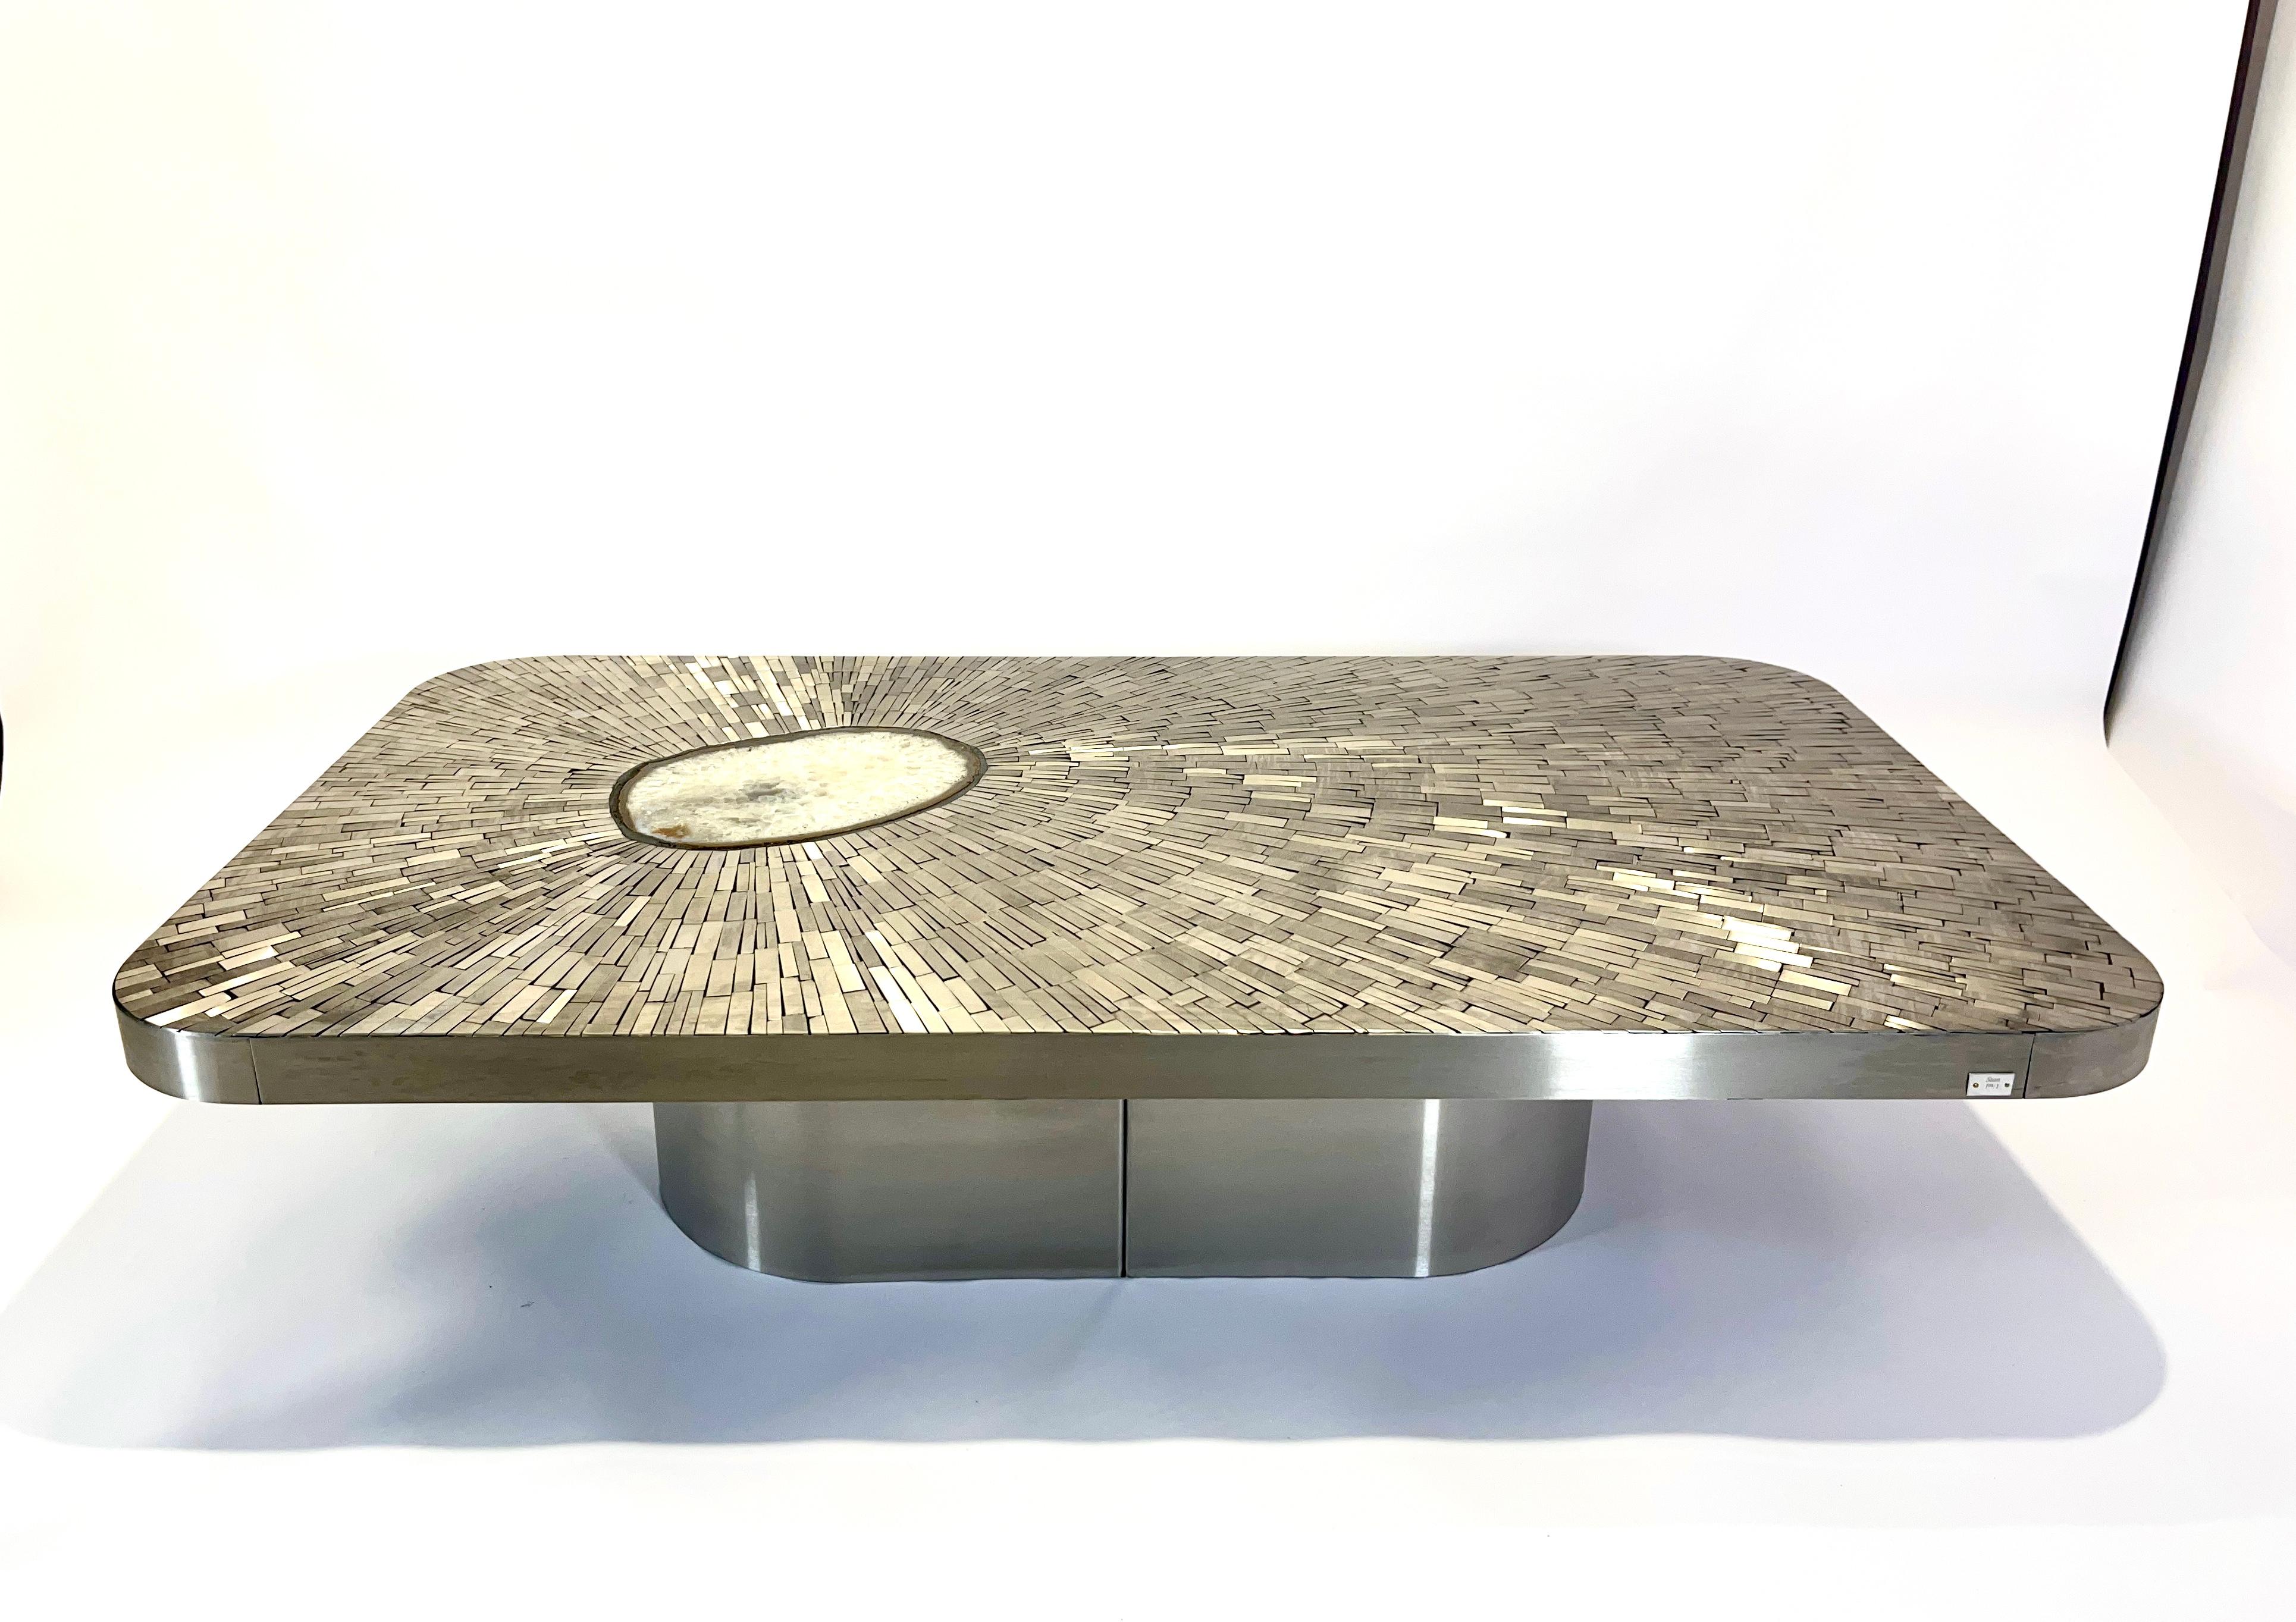 Created to measure by Stan Usel, this coffee table of stainless steel, table topped with a magnificent mosaic stainless steel agate gemstone highlighting a mosaic radiation. Each piece is topped with a unique stone and when put together aside gives